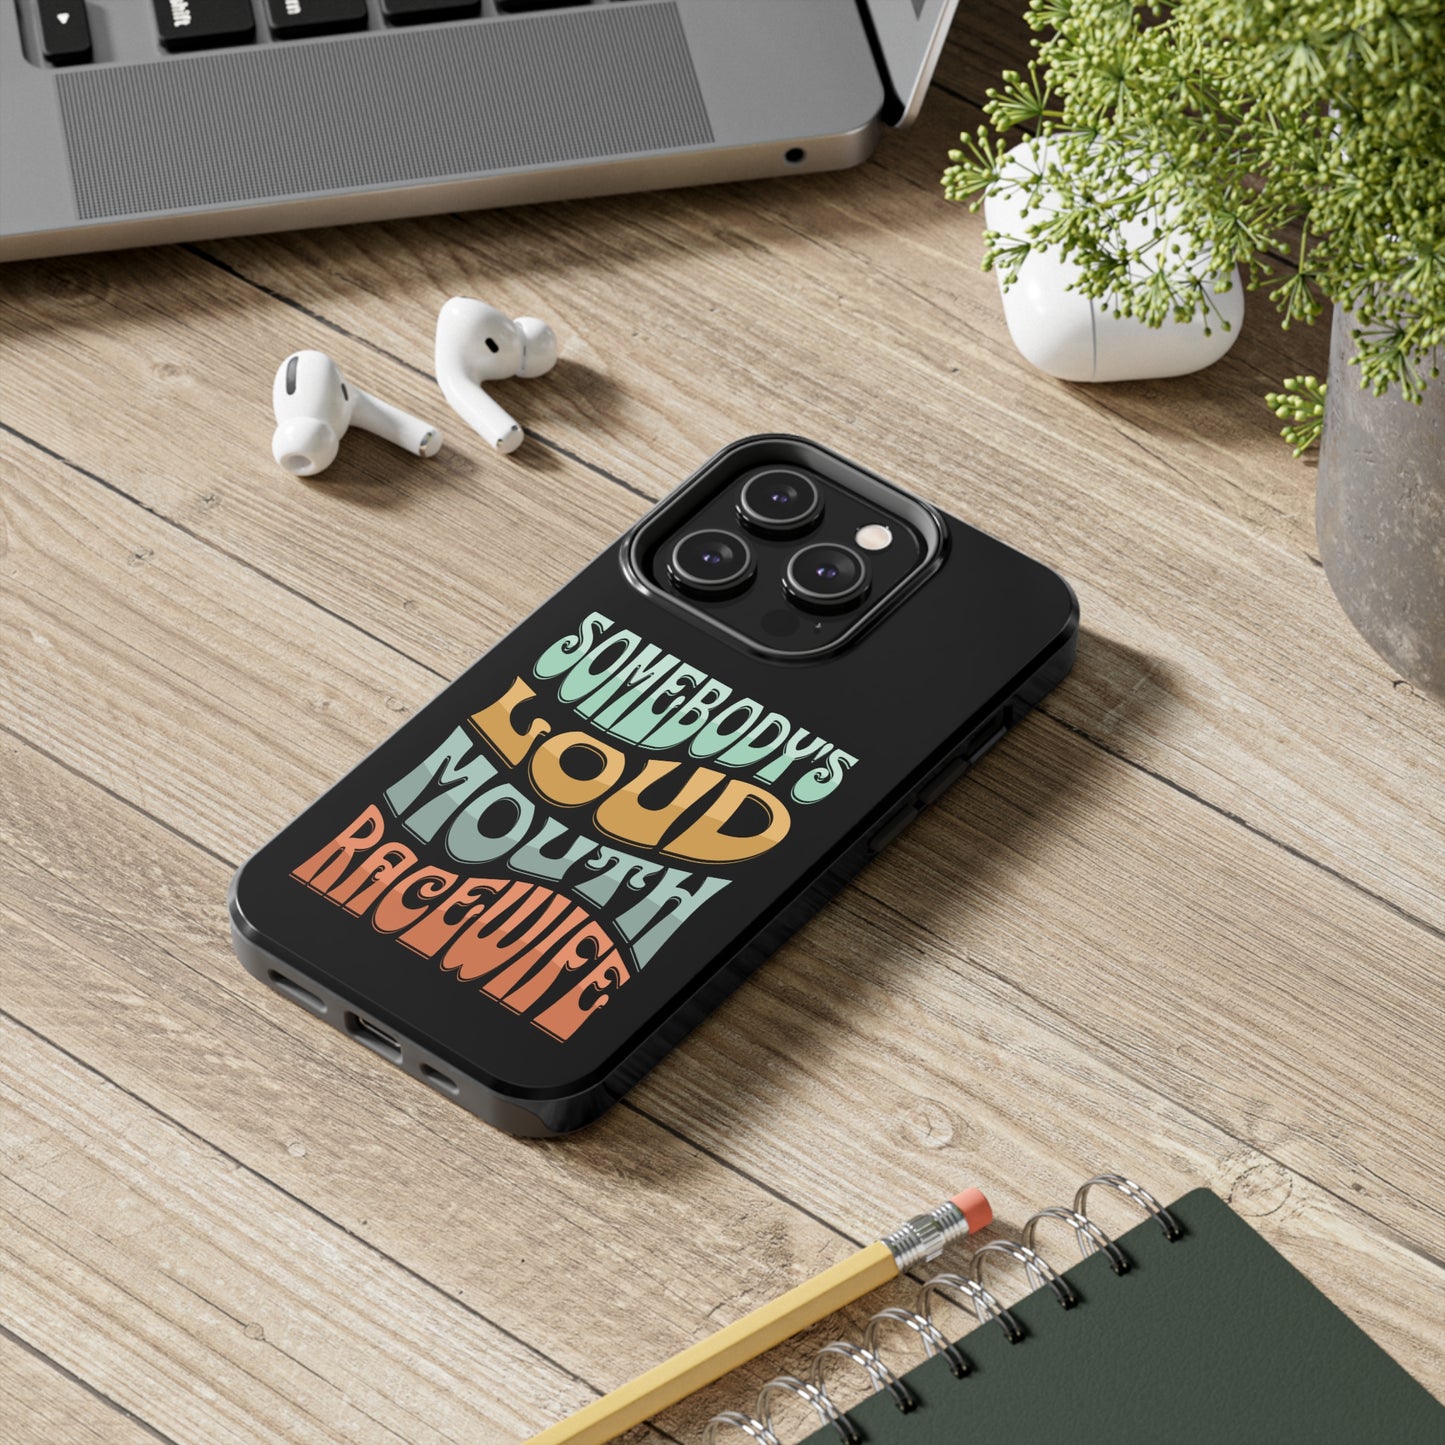 Somebody's Loud Mouth Race Wife Tough Phone Cases